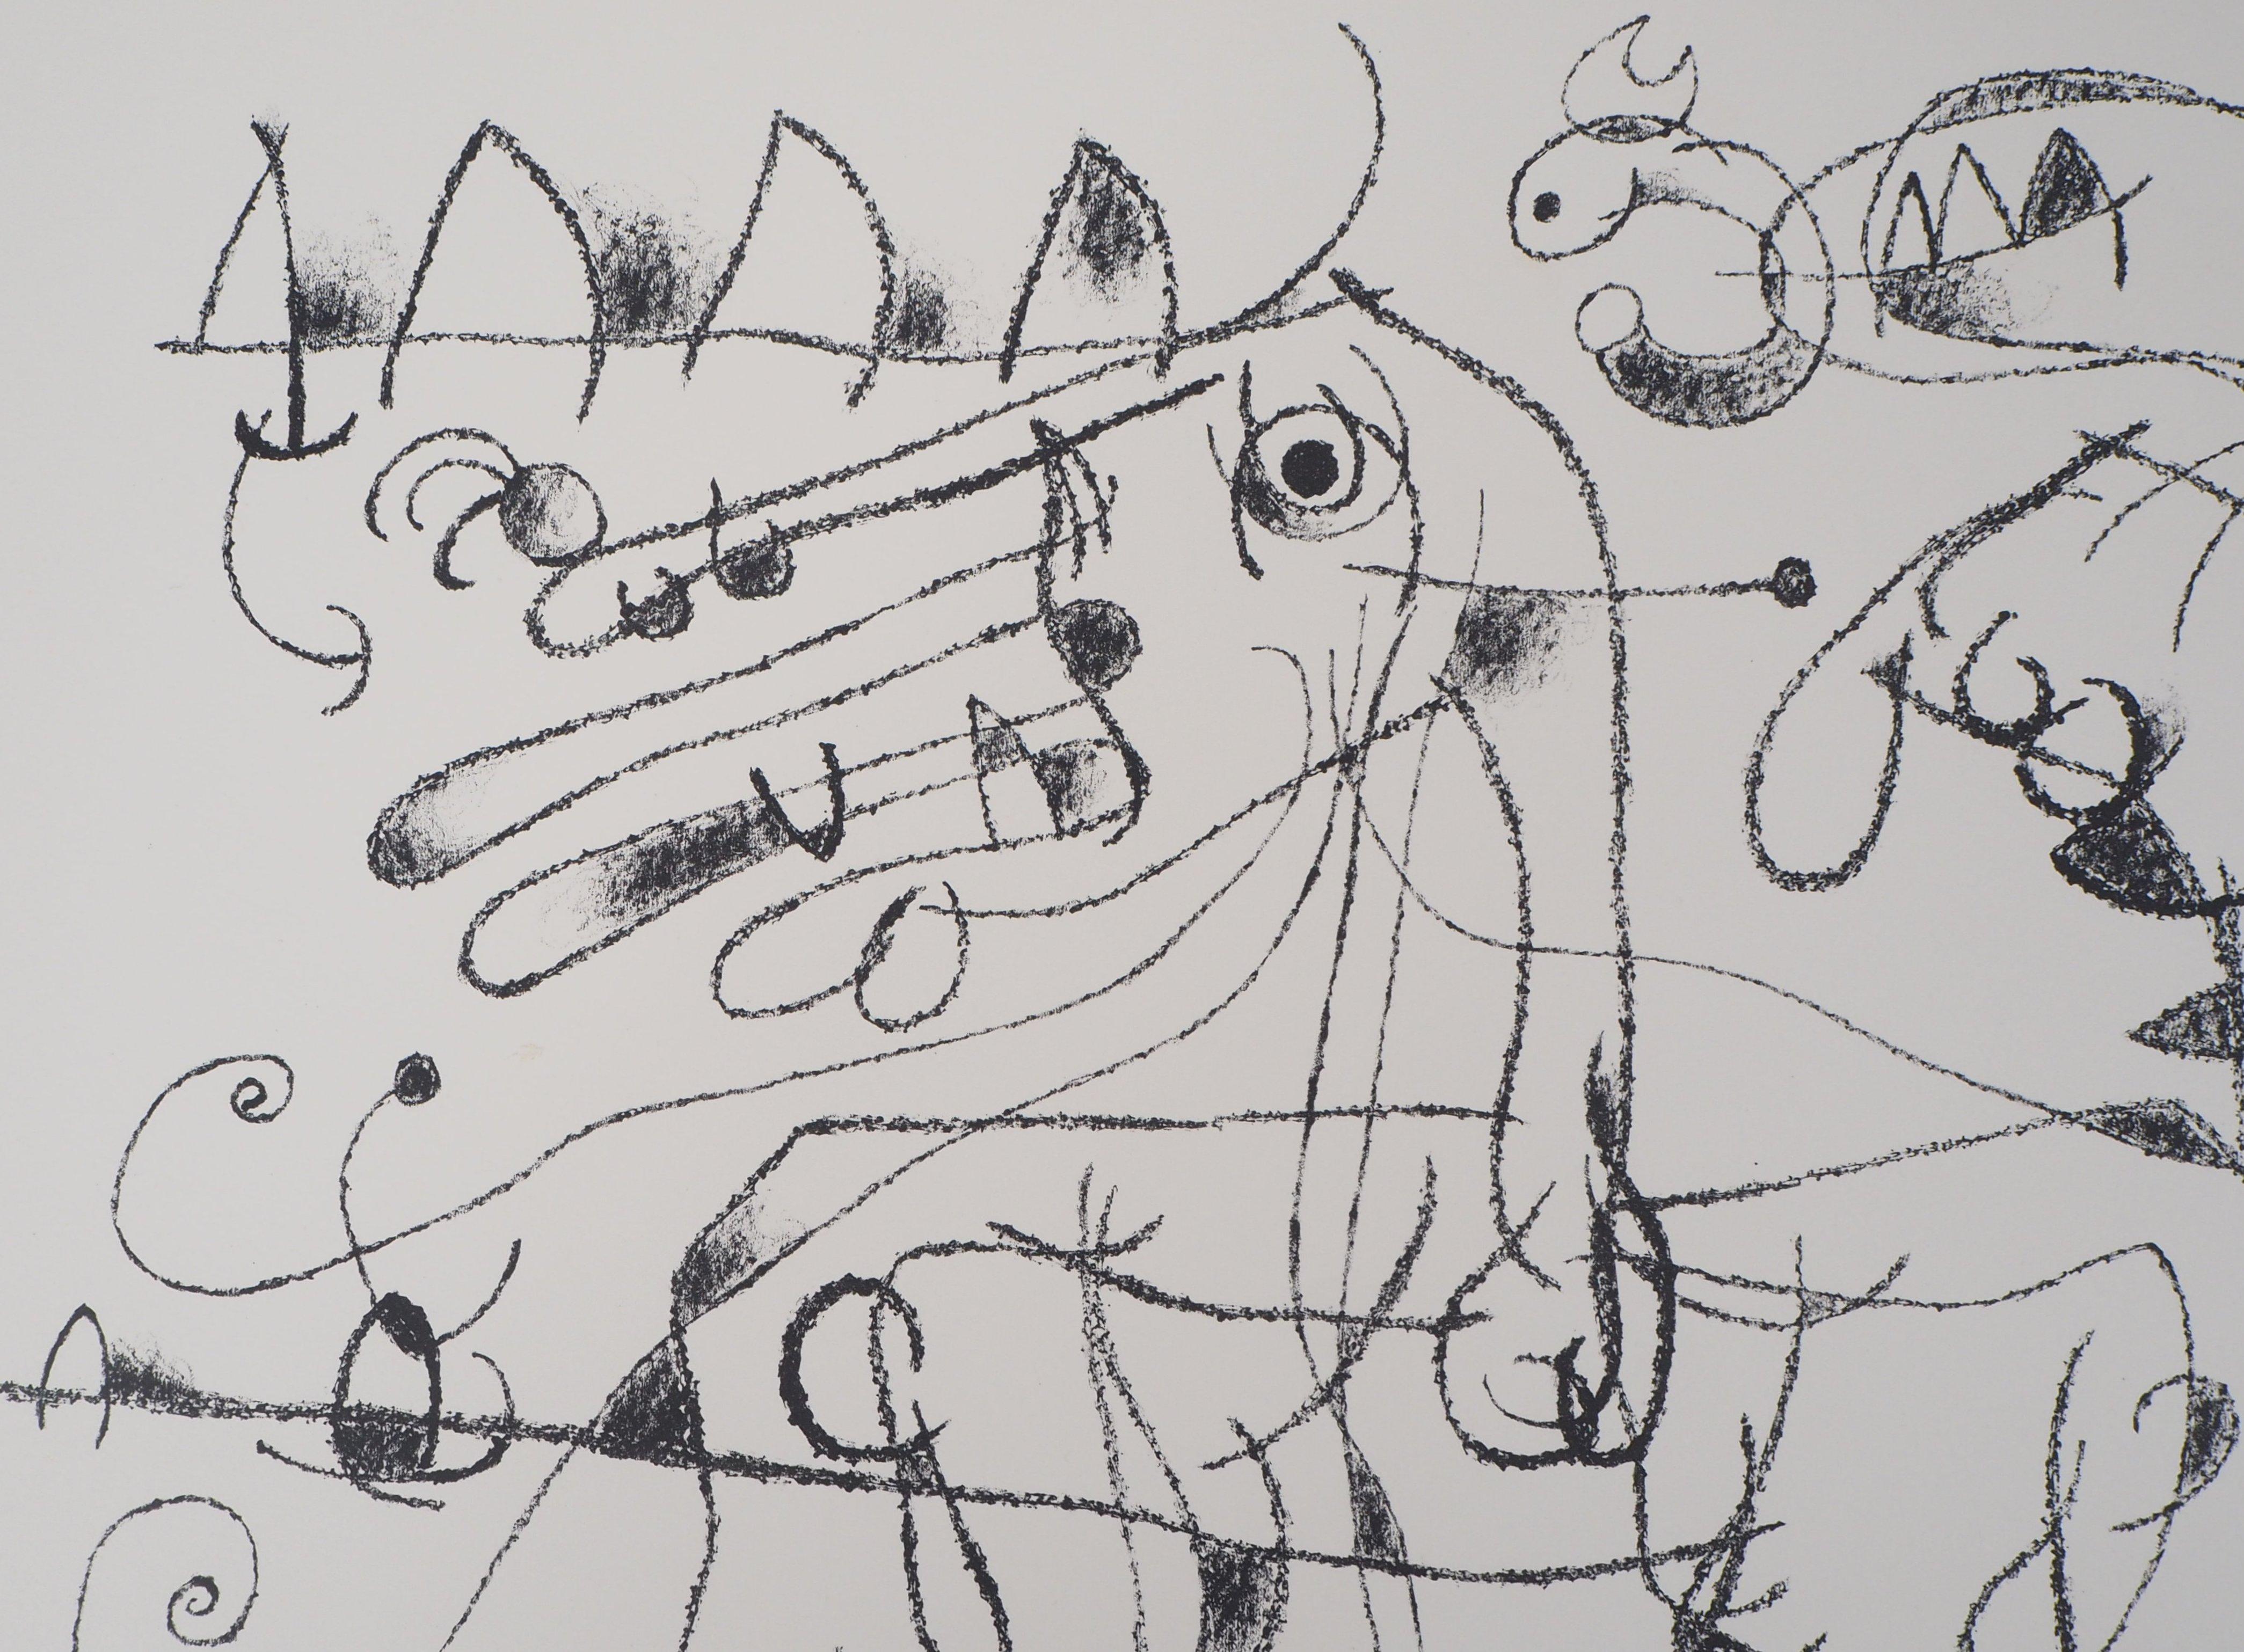 Joan MIRO (1893-1983)
King Ubu VIII, 1966

Original lithograph
Handsigned in pencil
Numbered / 75 copies
On Arches vellum 54 x 74.5 cm (c. 21.3 x 29.3 inches)

REFERENCES : Catalog raisonne Mourlot - Maeght #481

Very good condition, minor defects